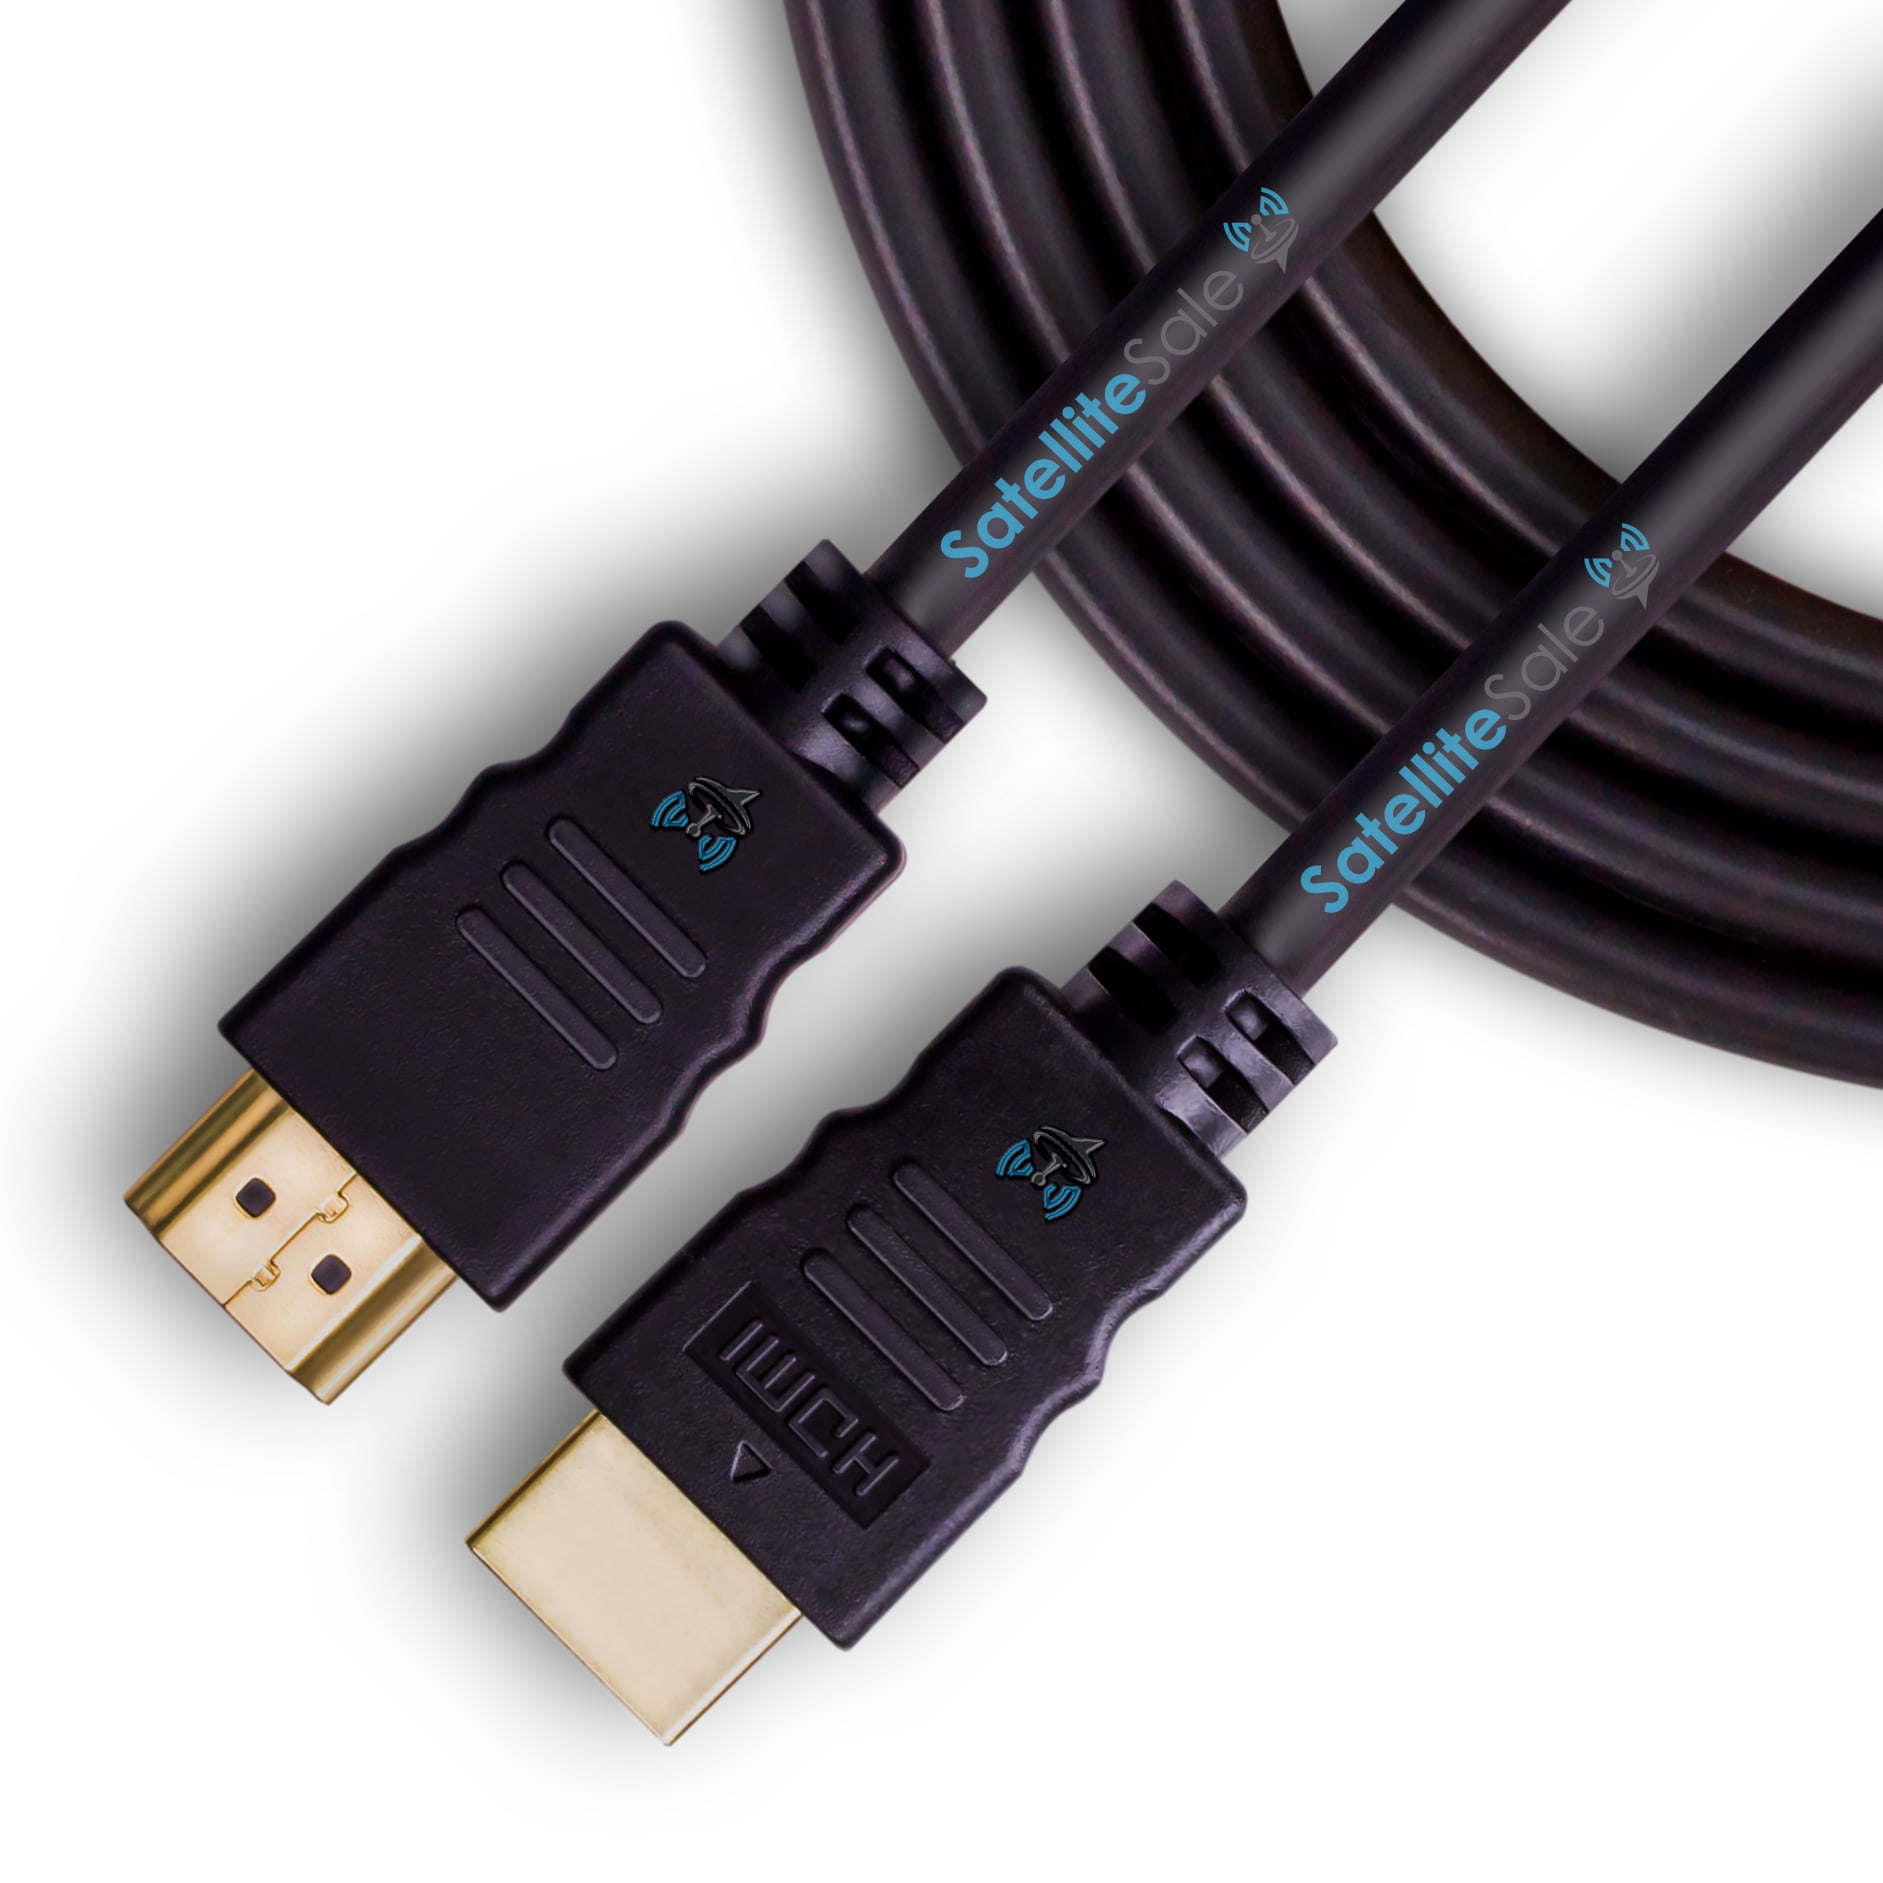  WireX HDMICABLE-Z - Cable HDMI tipo A a tipo A, 9.8 ft